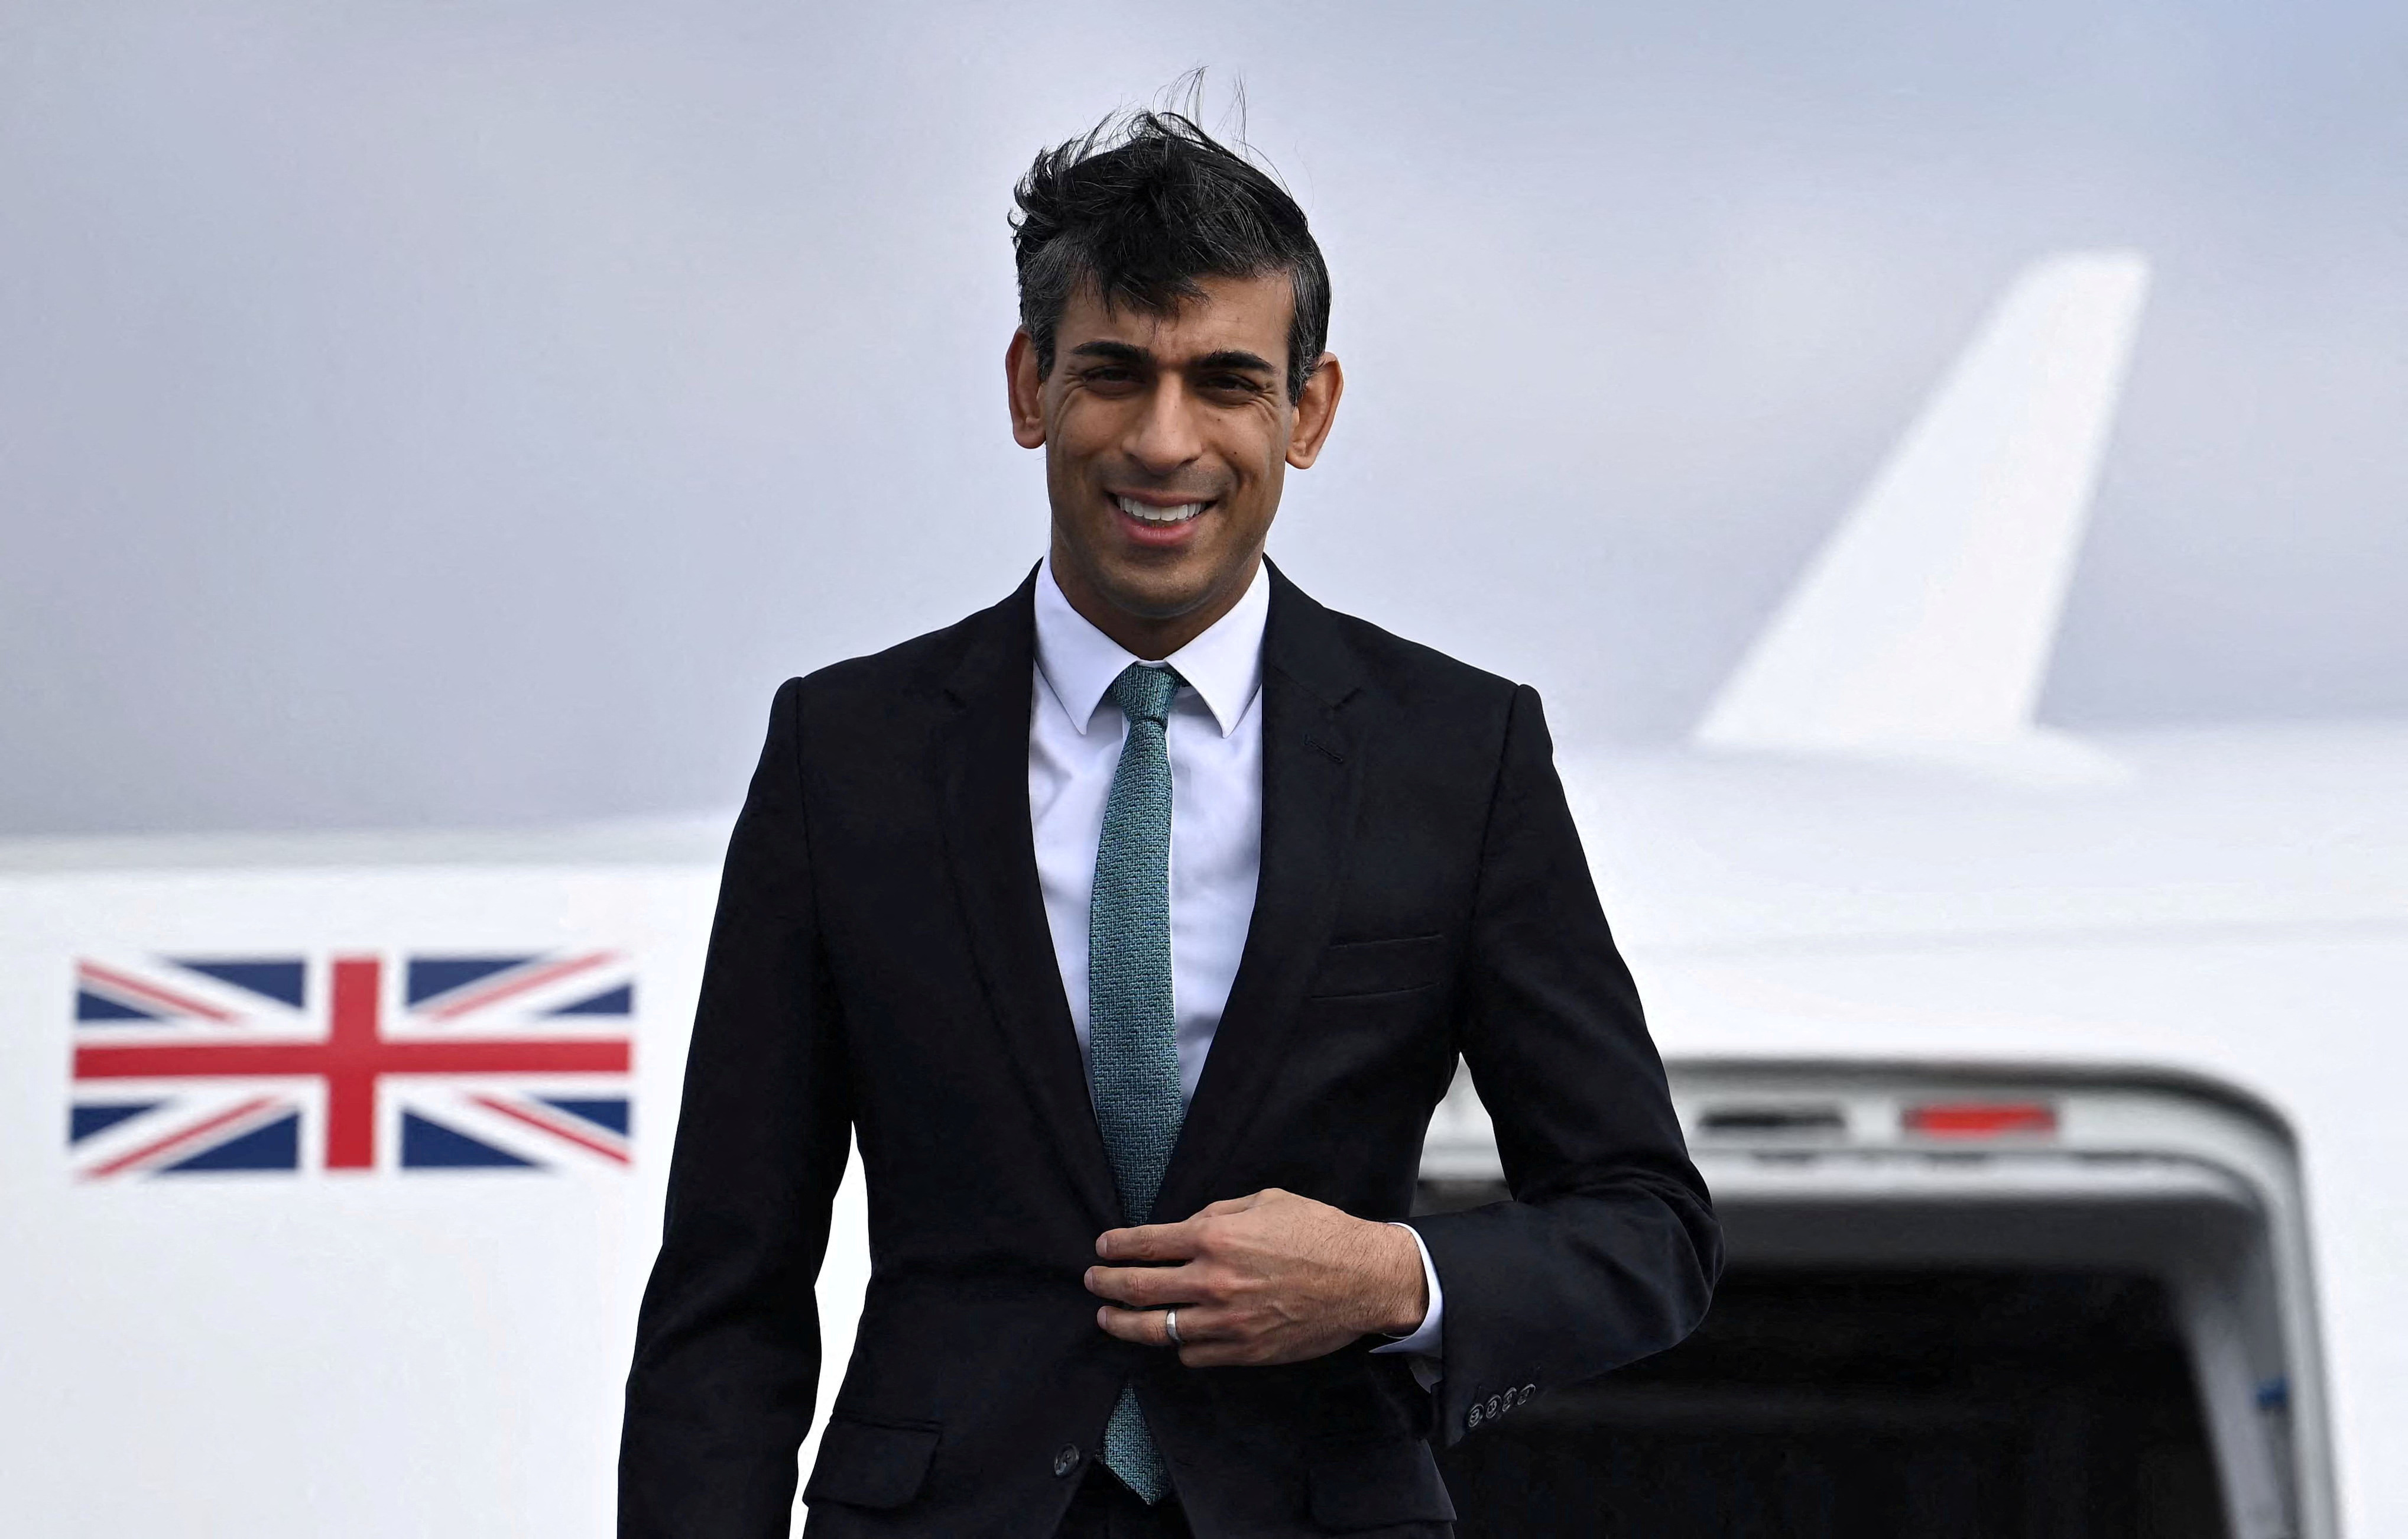 British Prime Minister Rishi Sunak gets off his plane after his arrival on February 18, 2023 at the airport in Munich